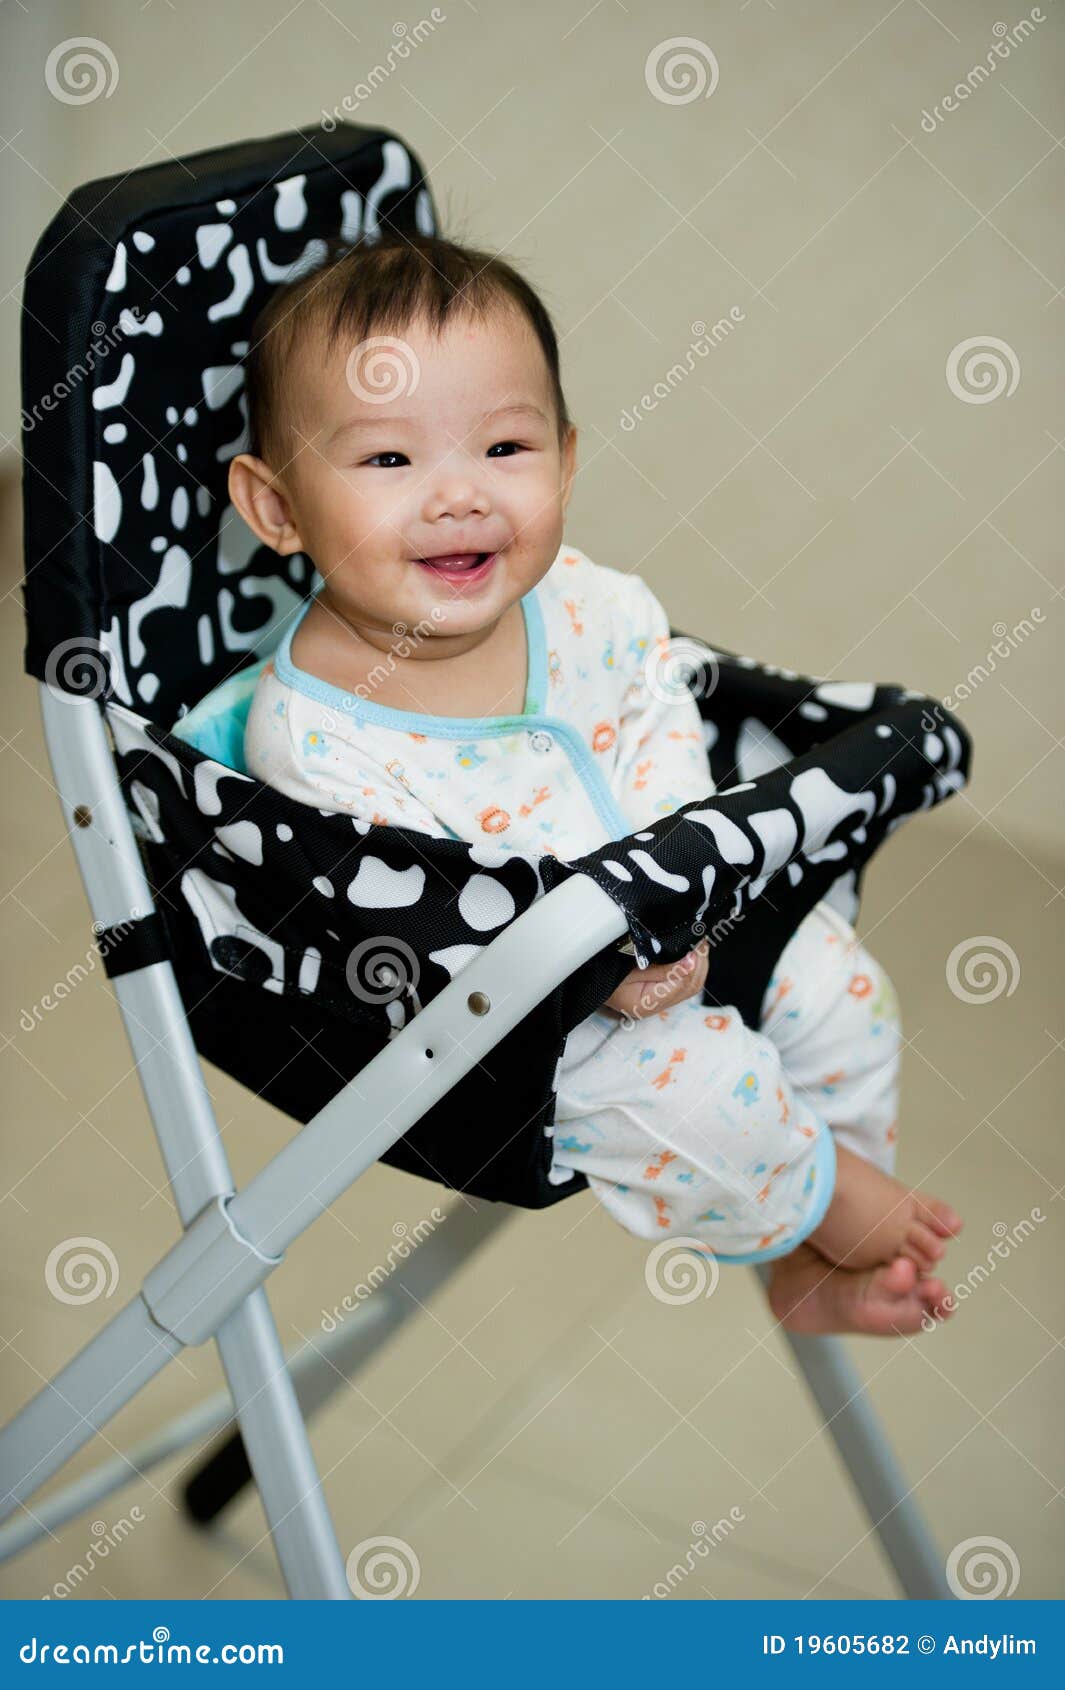 6 month old baby sitting chair